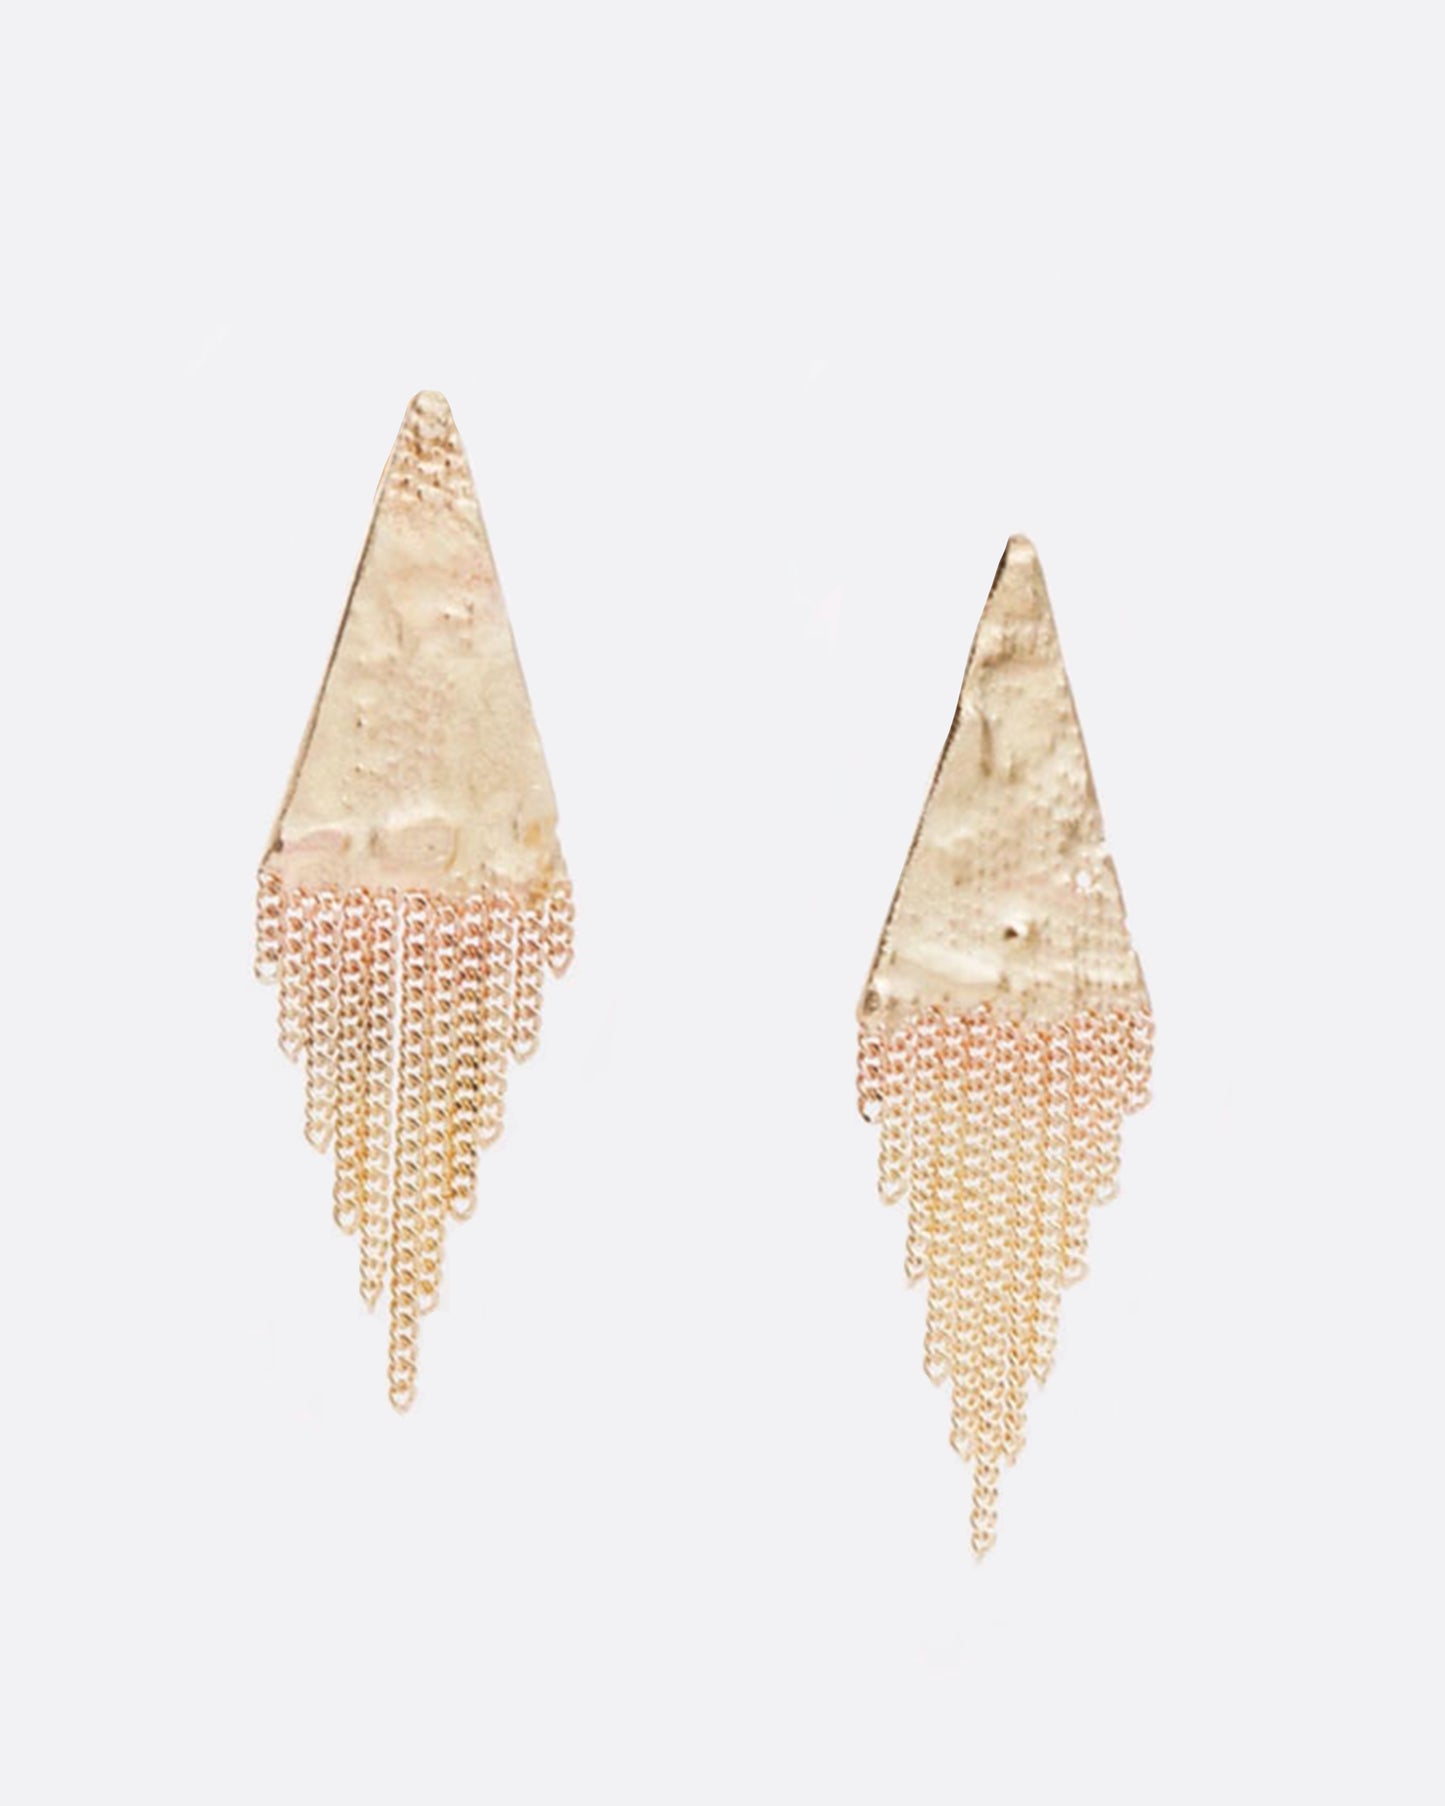 Yellow gold soldered triangle earrings with loose multi-strand chains.